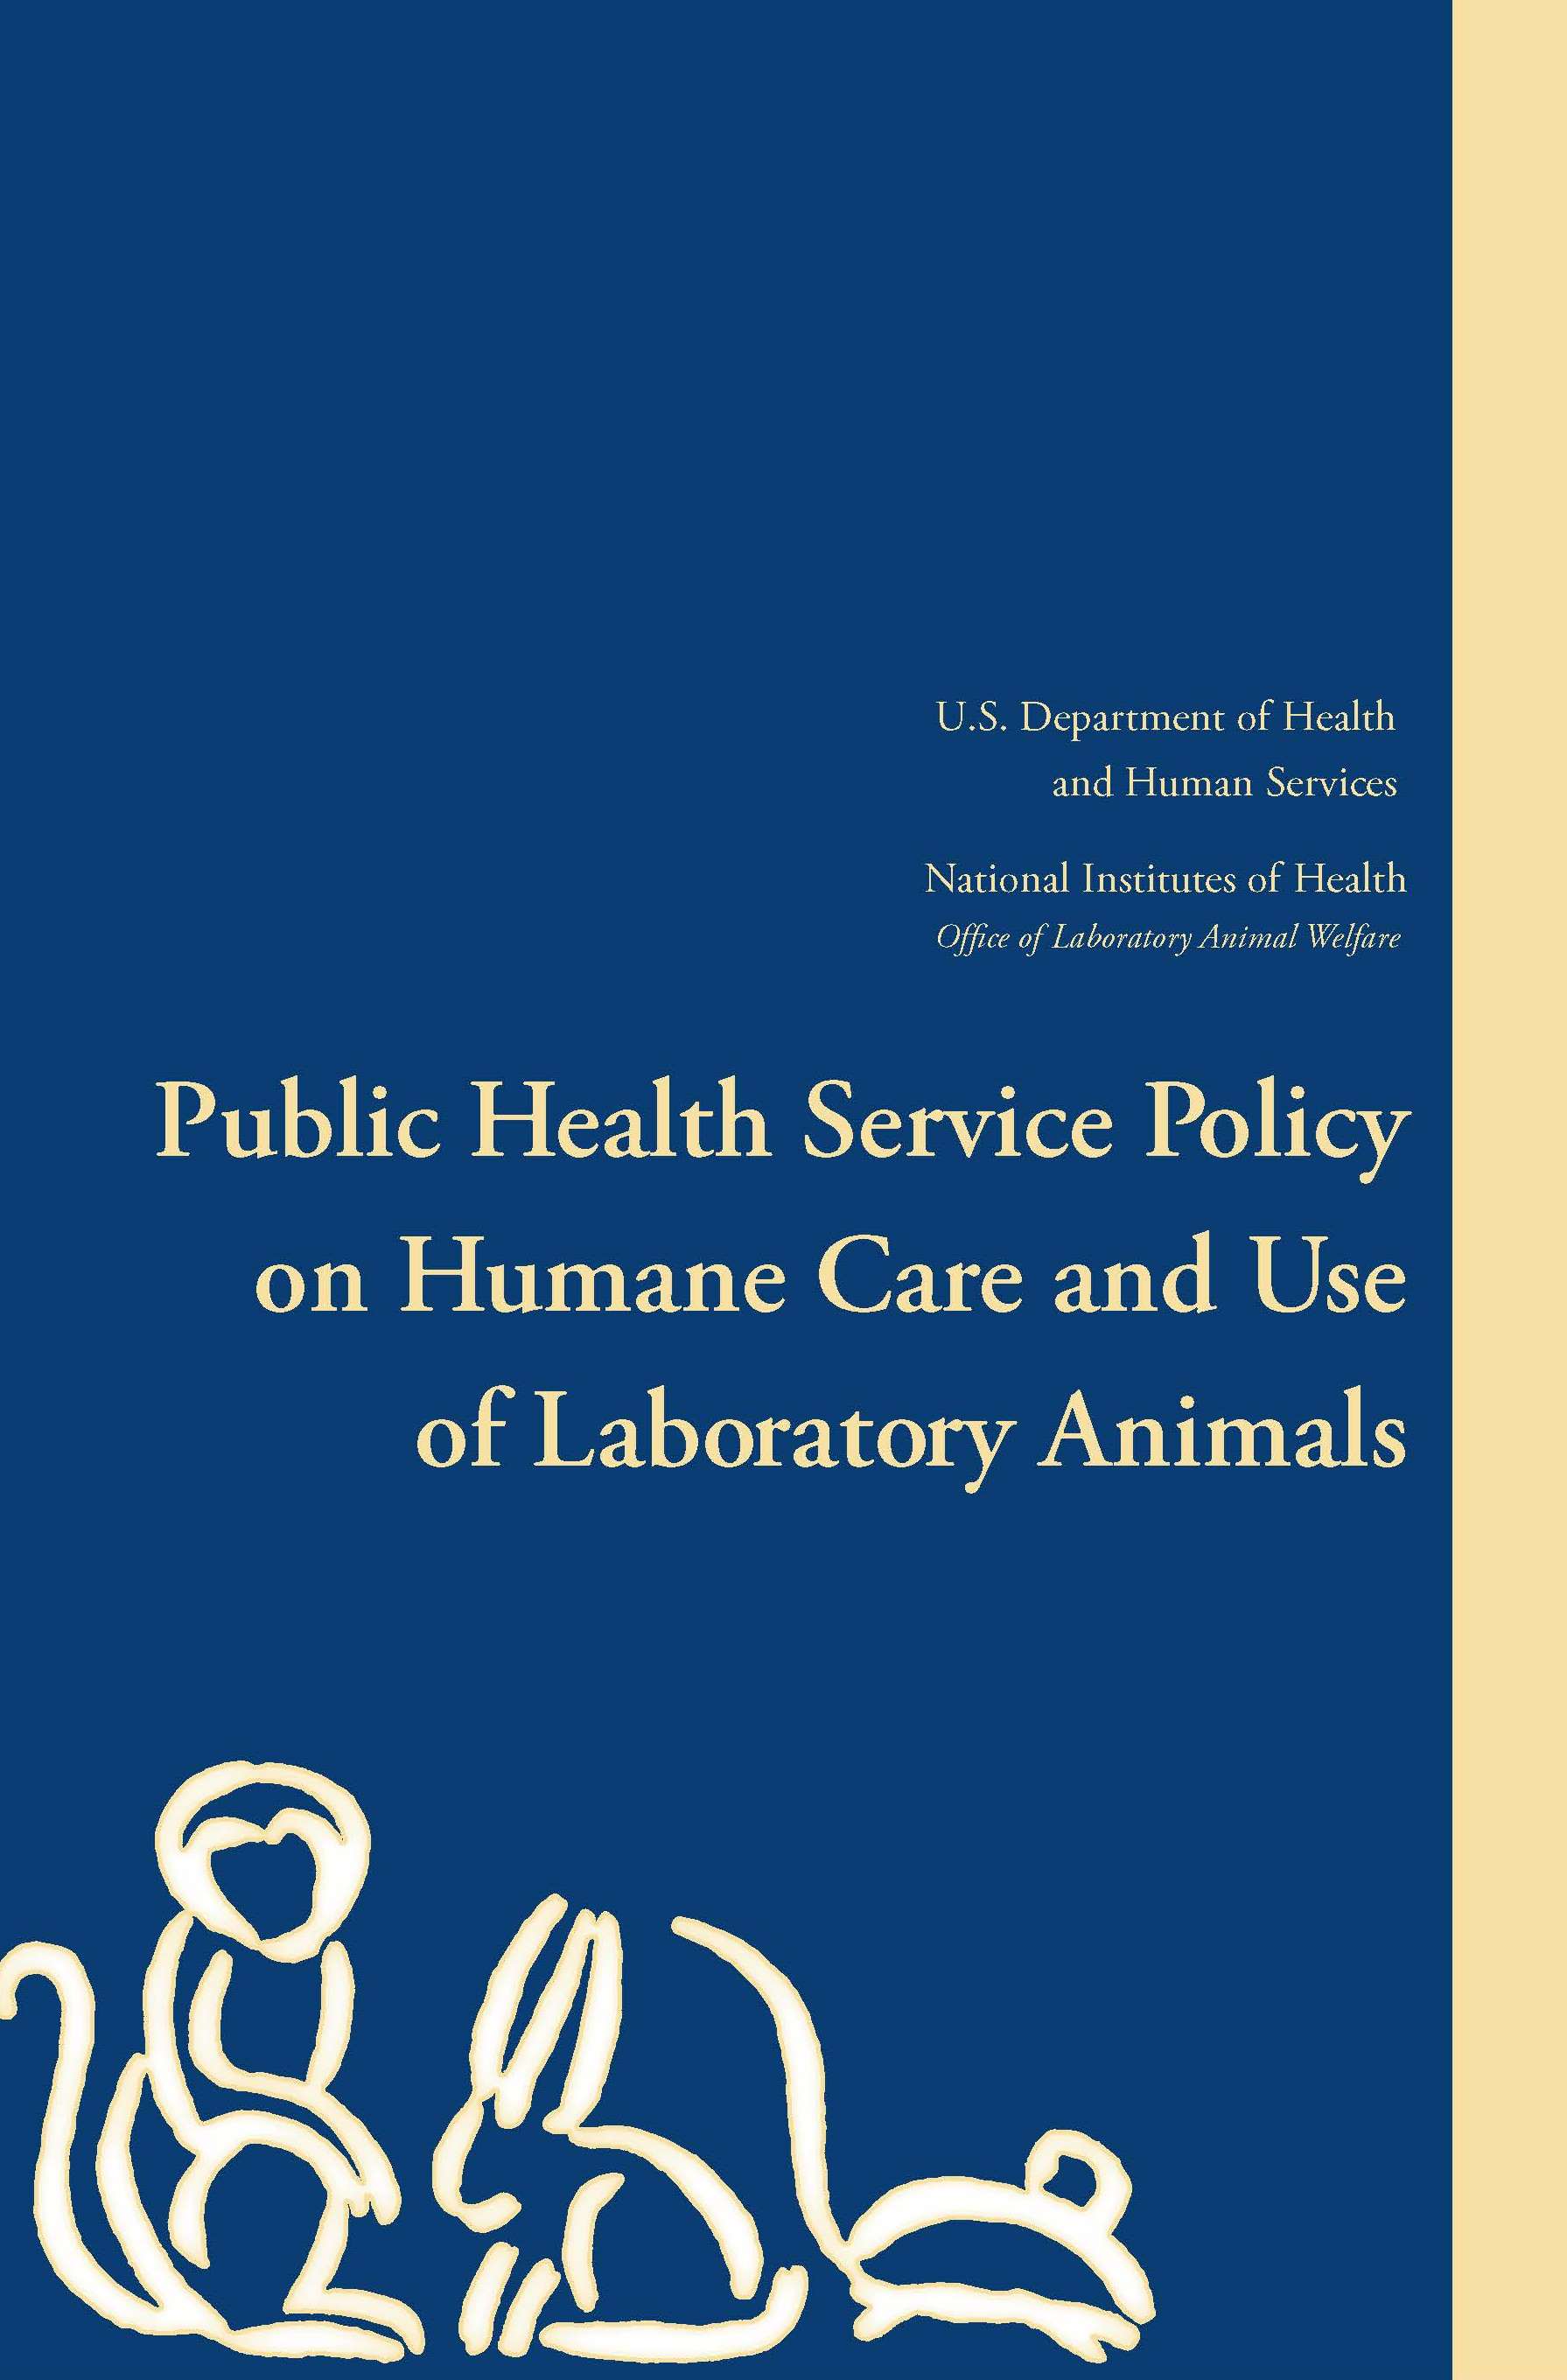 Public Health Service Policy on Humane Care and Use of Laboratory Animals